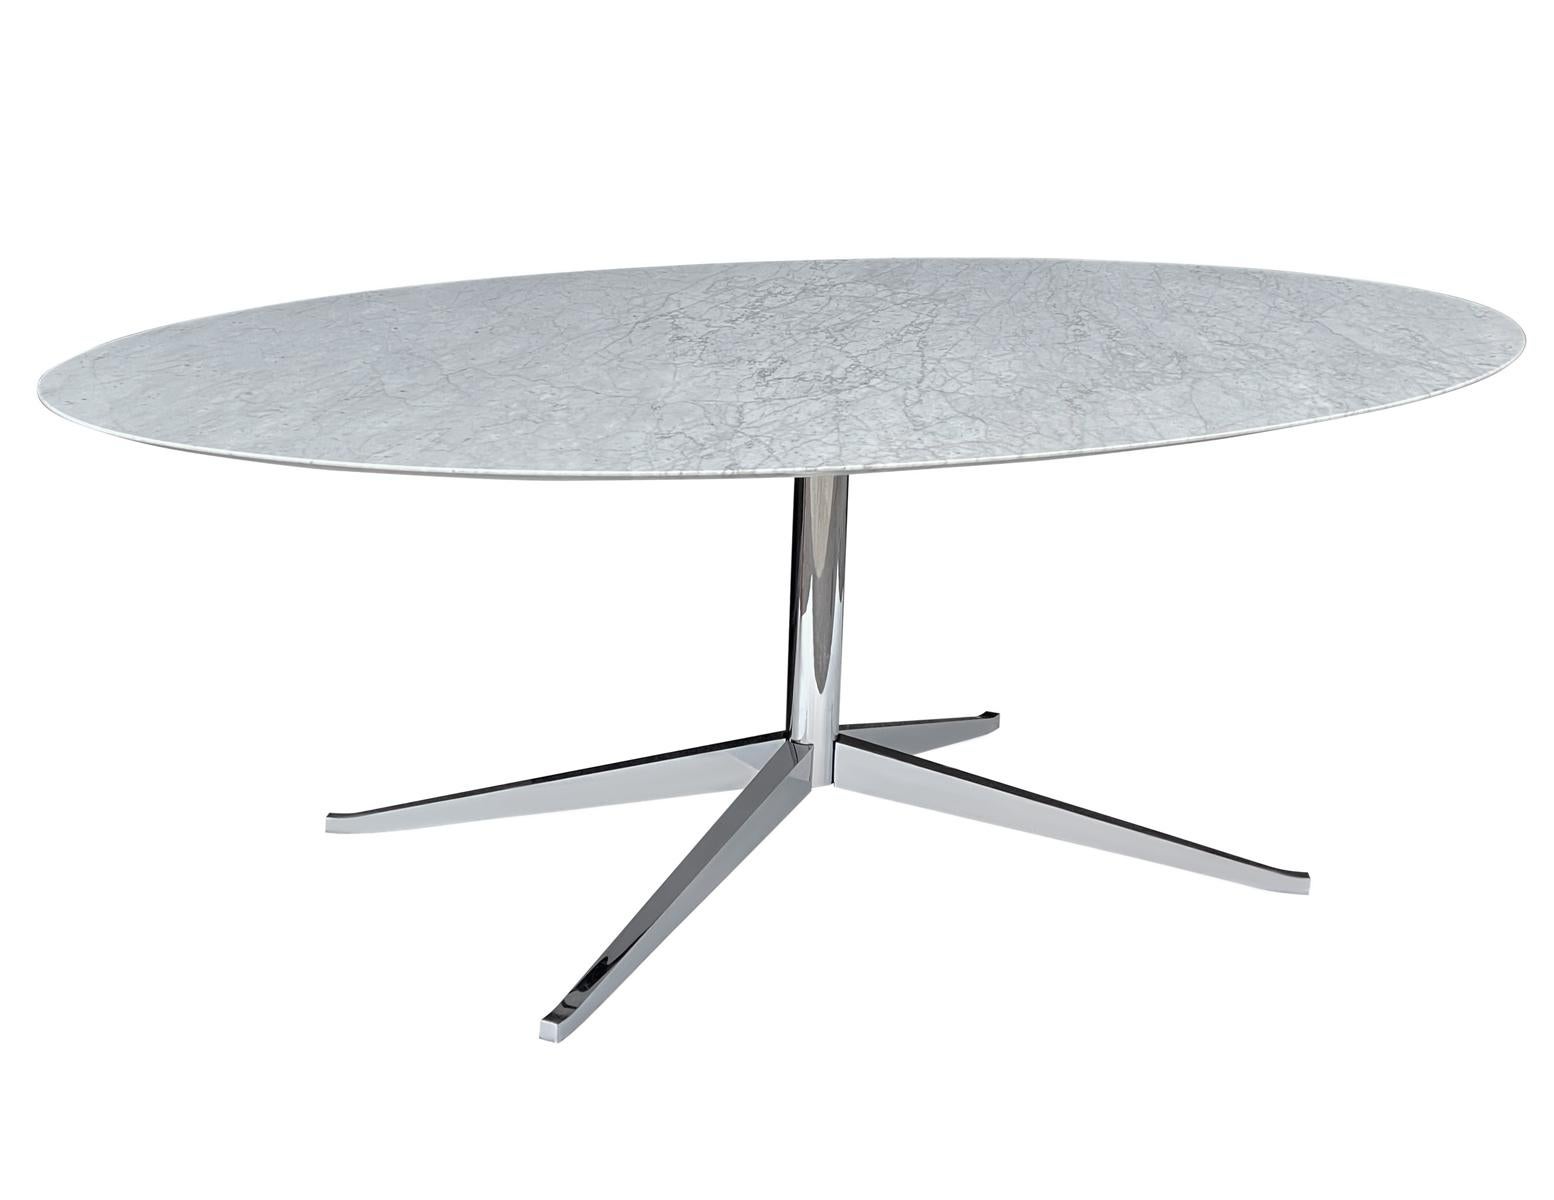 American Mid-Century Modern Oval Dining Table or Desk by Florence Knoll in Carrara Marble For Sale